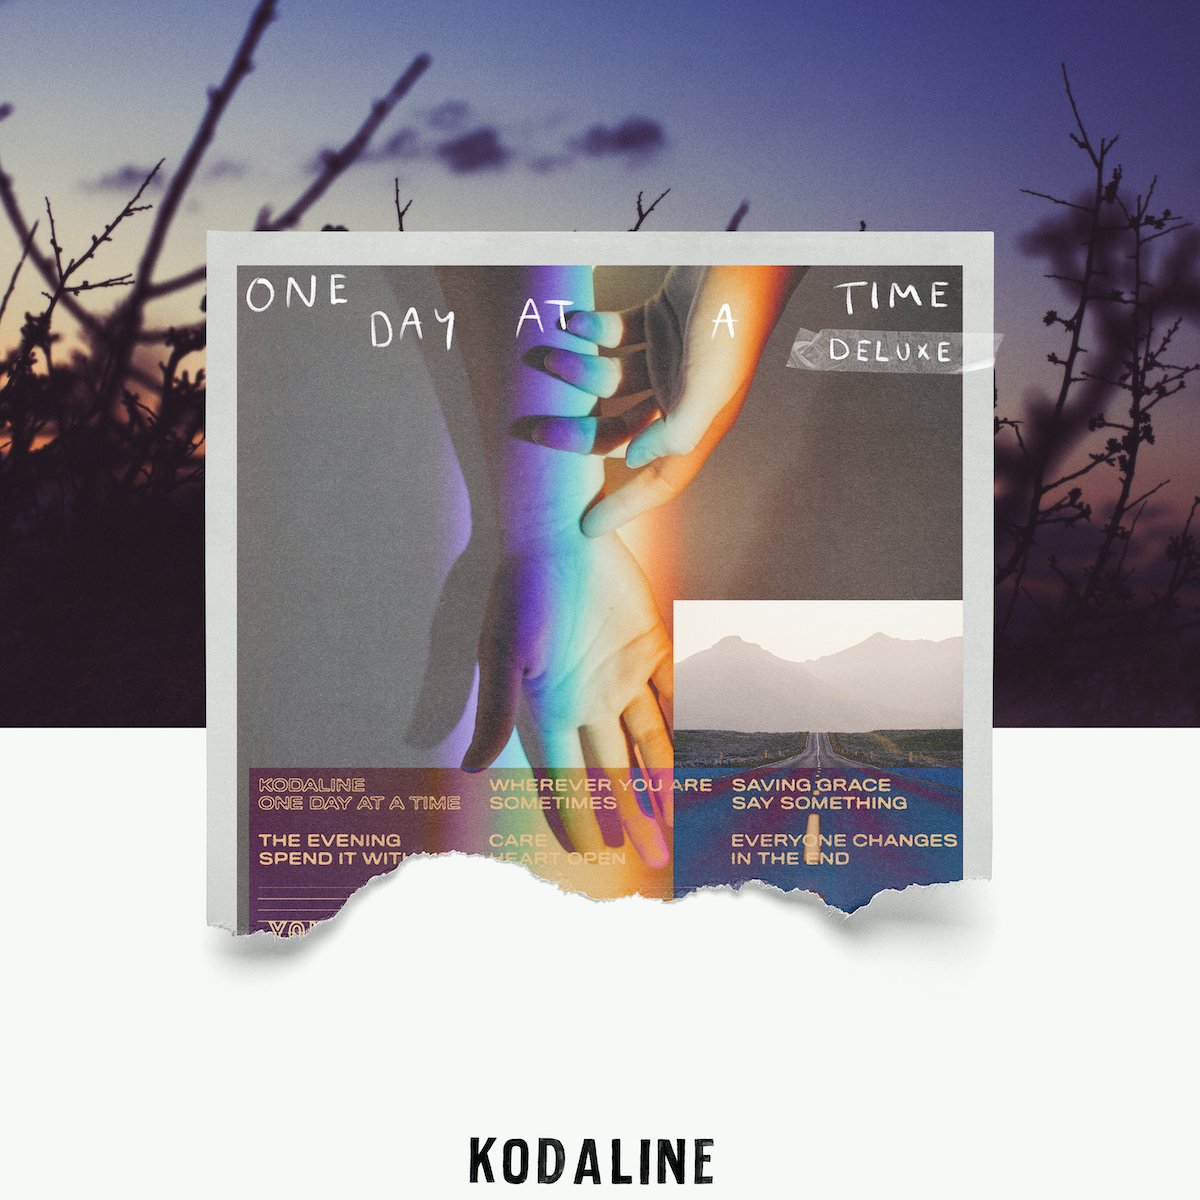 KODALINE - One Day At A Time (Deluxe Gatefold) - 2LP - Vinyl